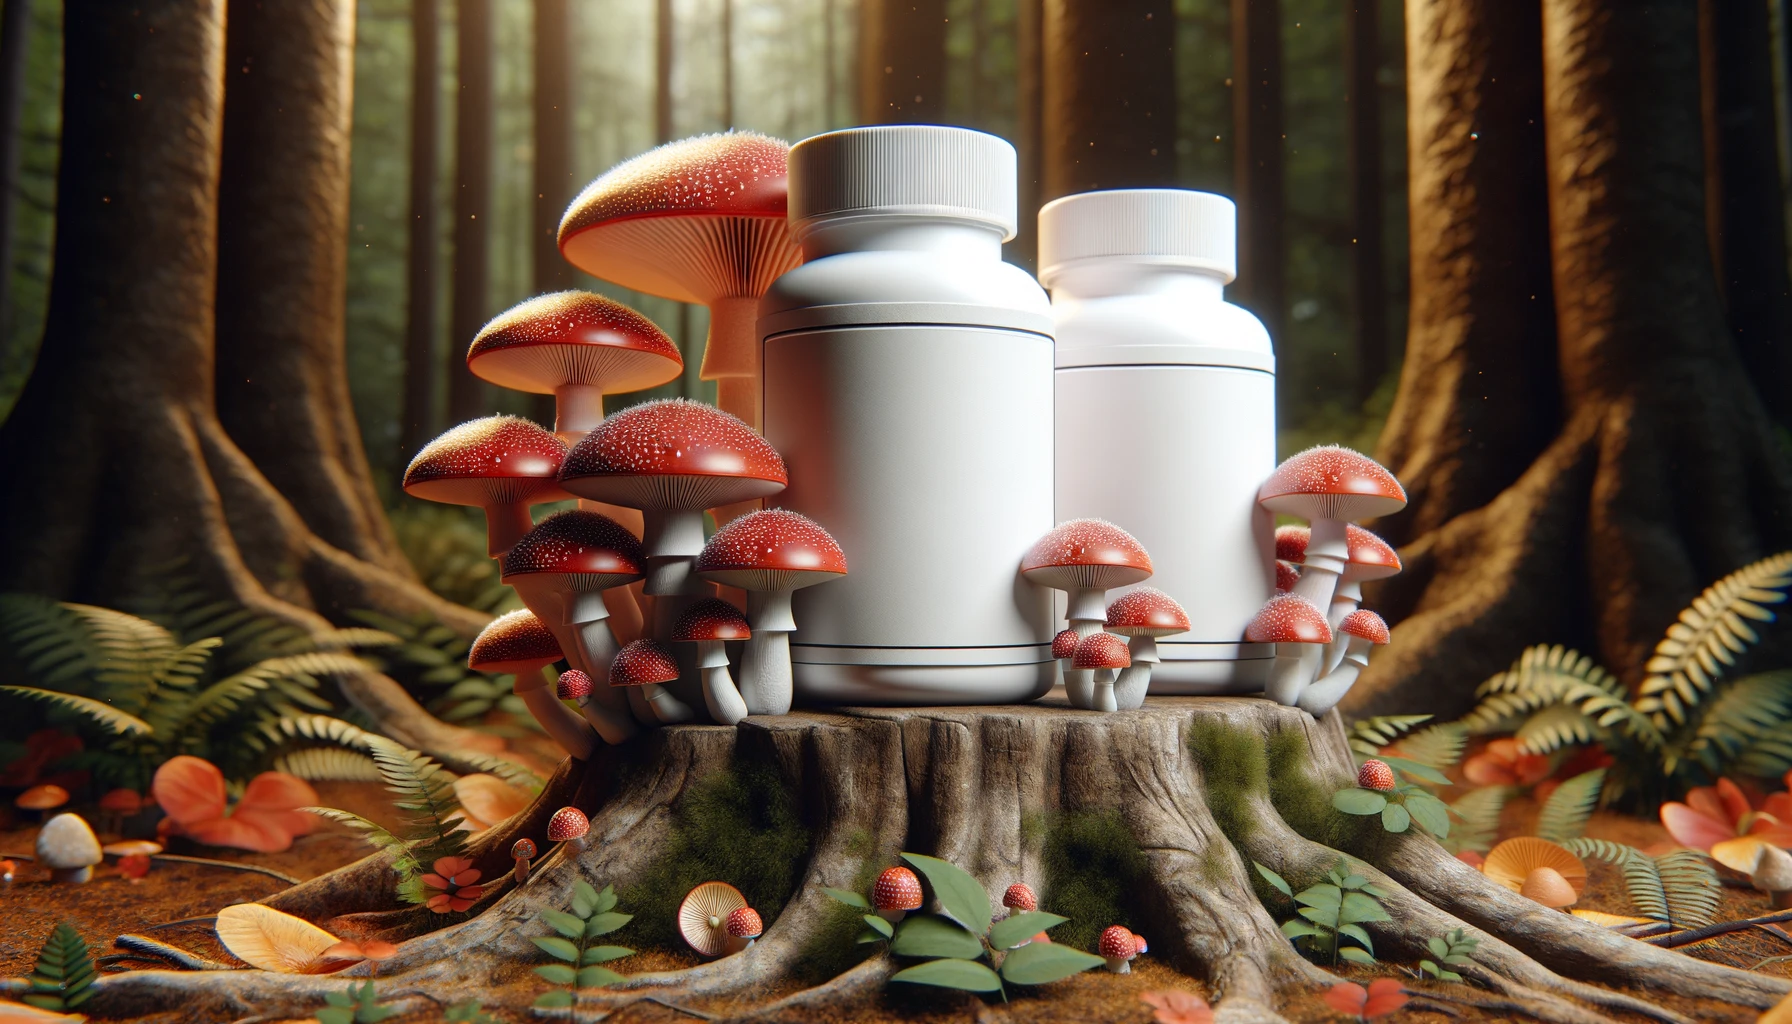 DALL·E 2024-03-05 11.07.23 - An image showcasing two supplement bottles standing on top of wild-looking mushrooms. The bottles are white with blank labels, having no text or brand